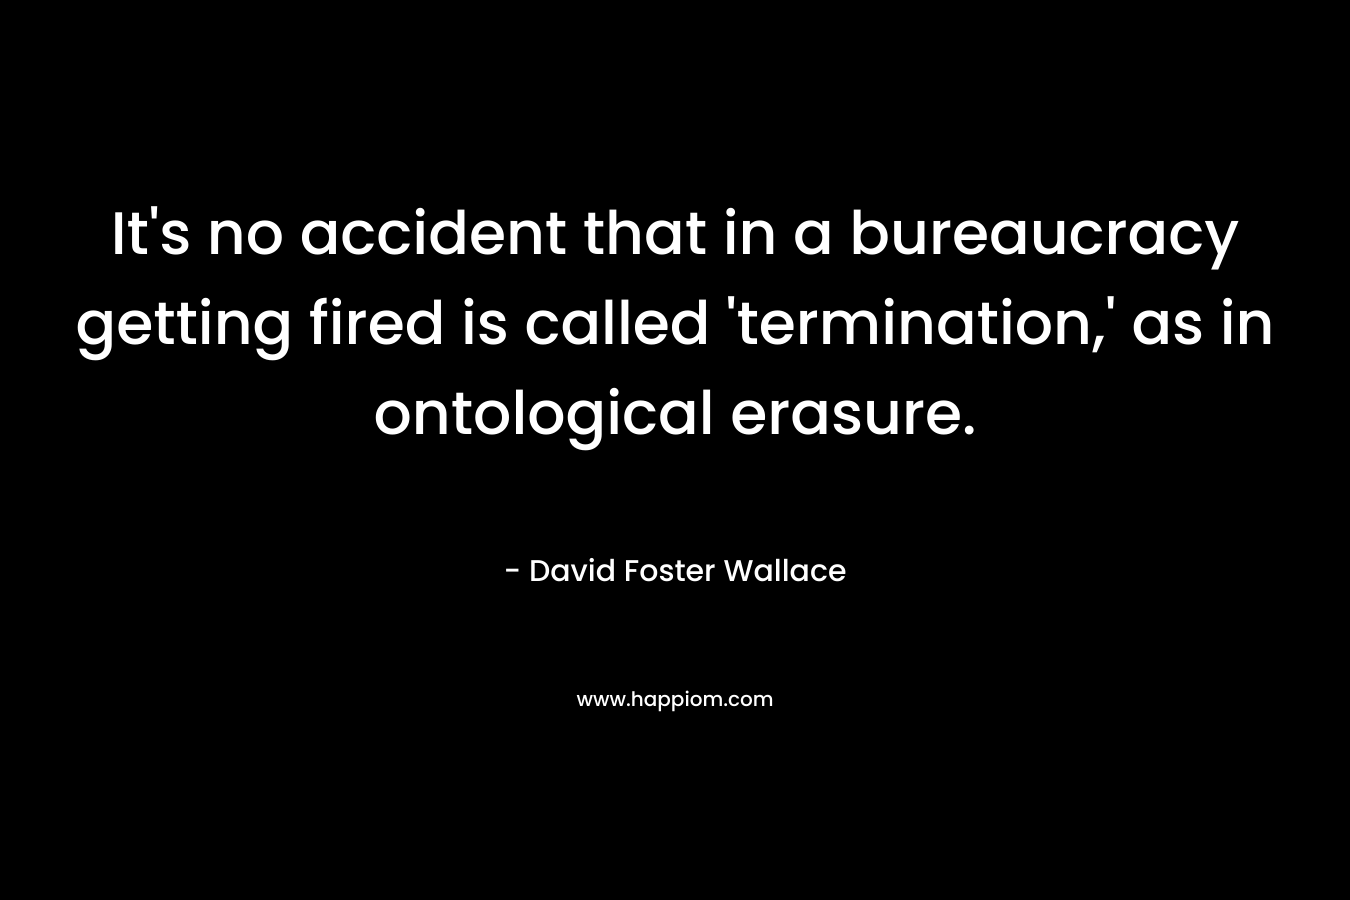 It’s no accident that in a bureaucracy getting fired is called ‘termination,’ as in ontological erasure. – David Foster Wallace